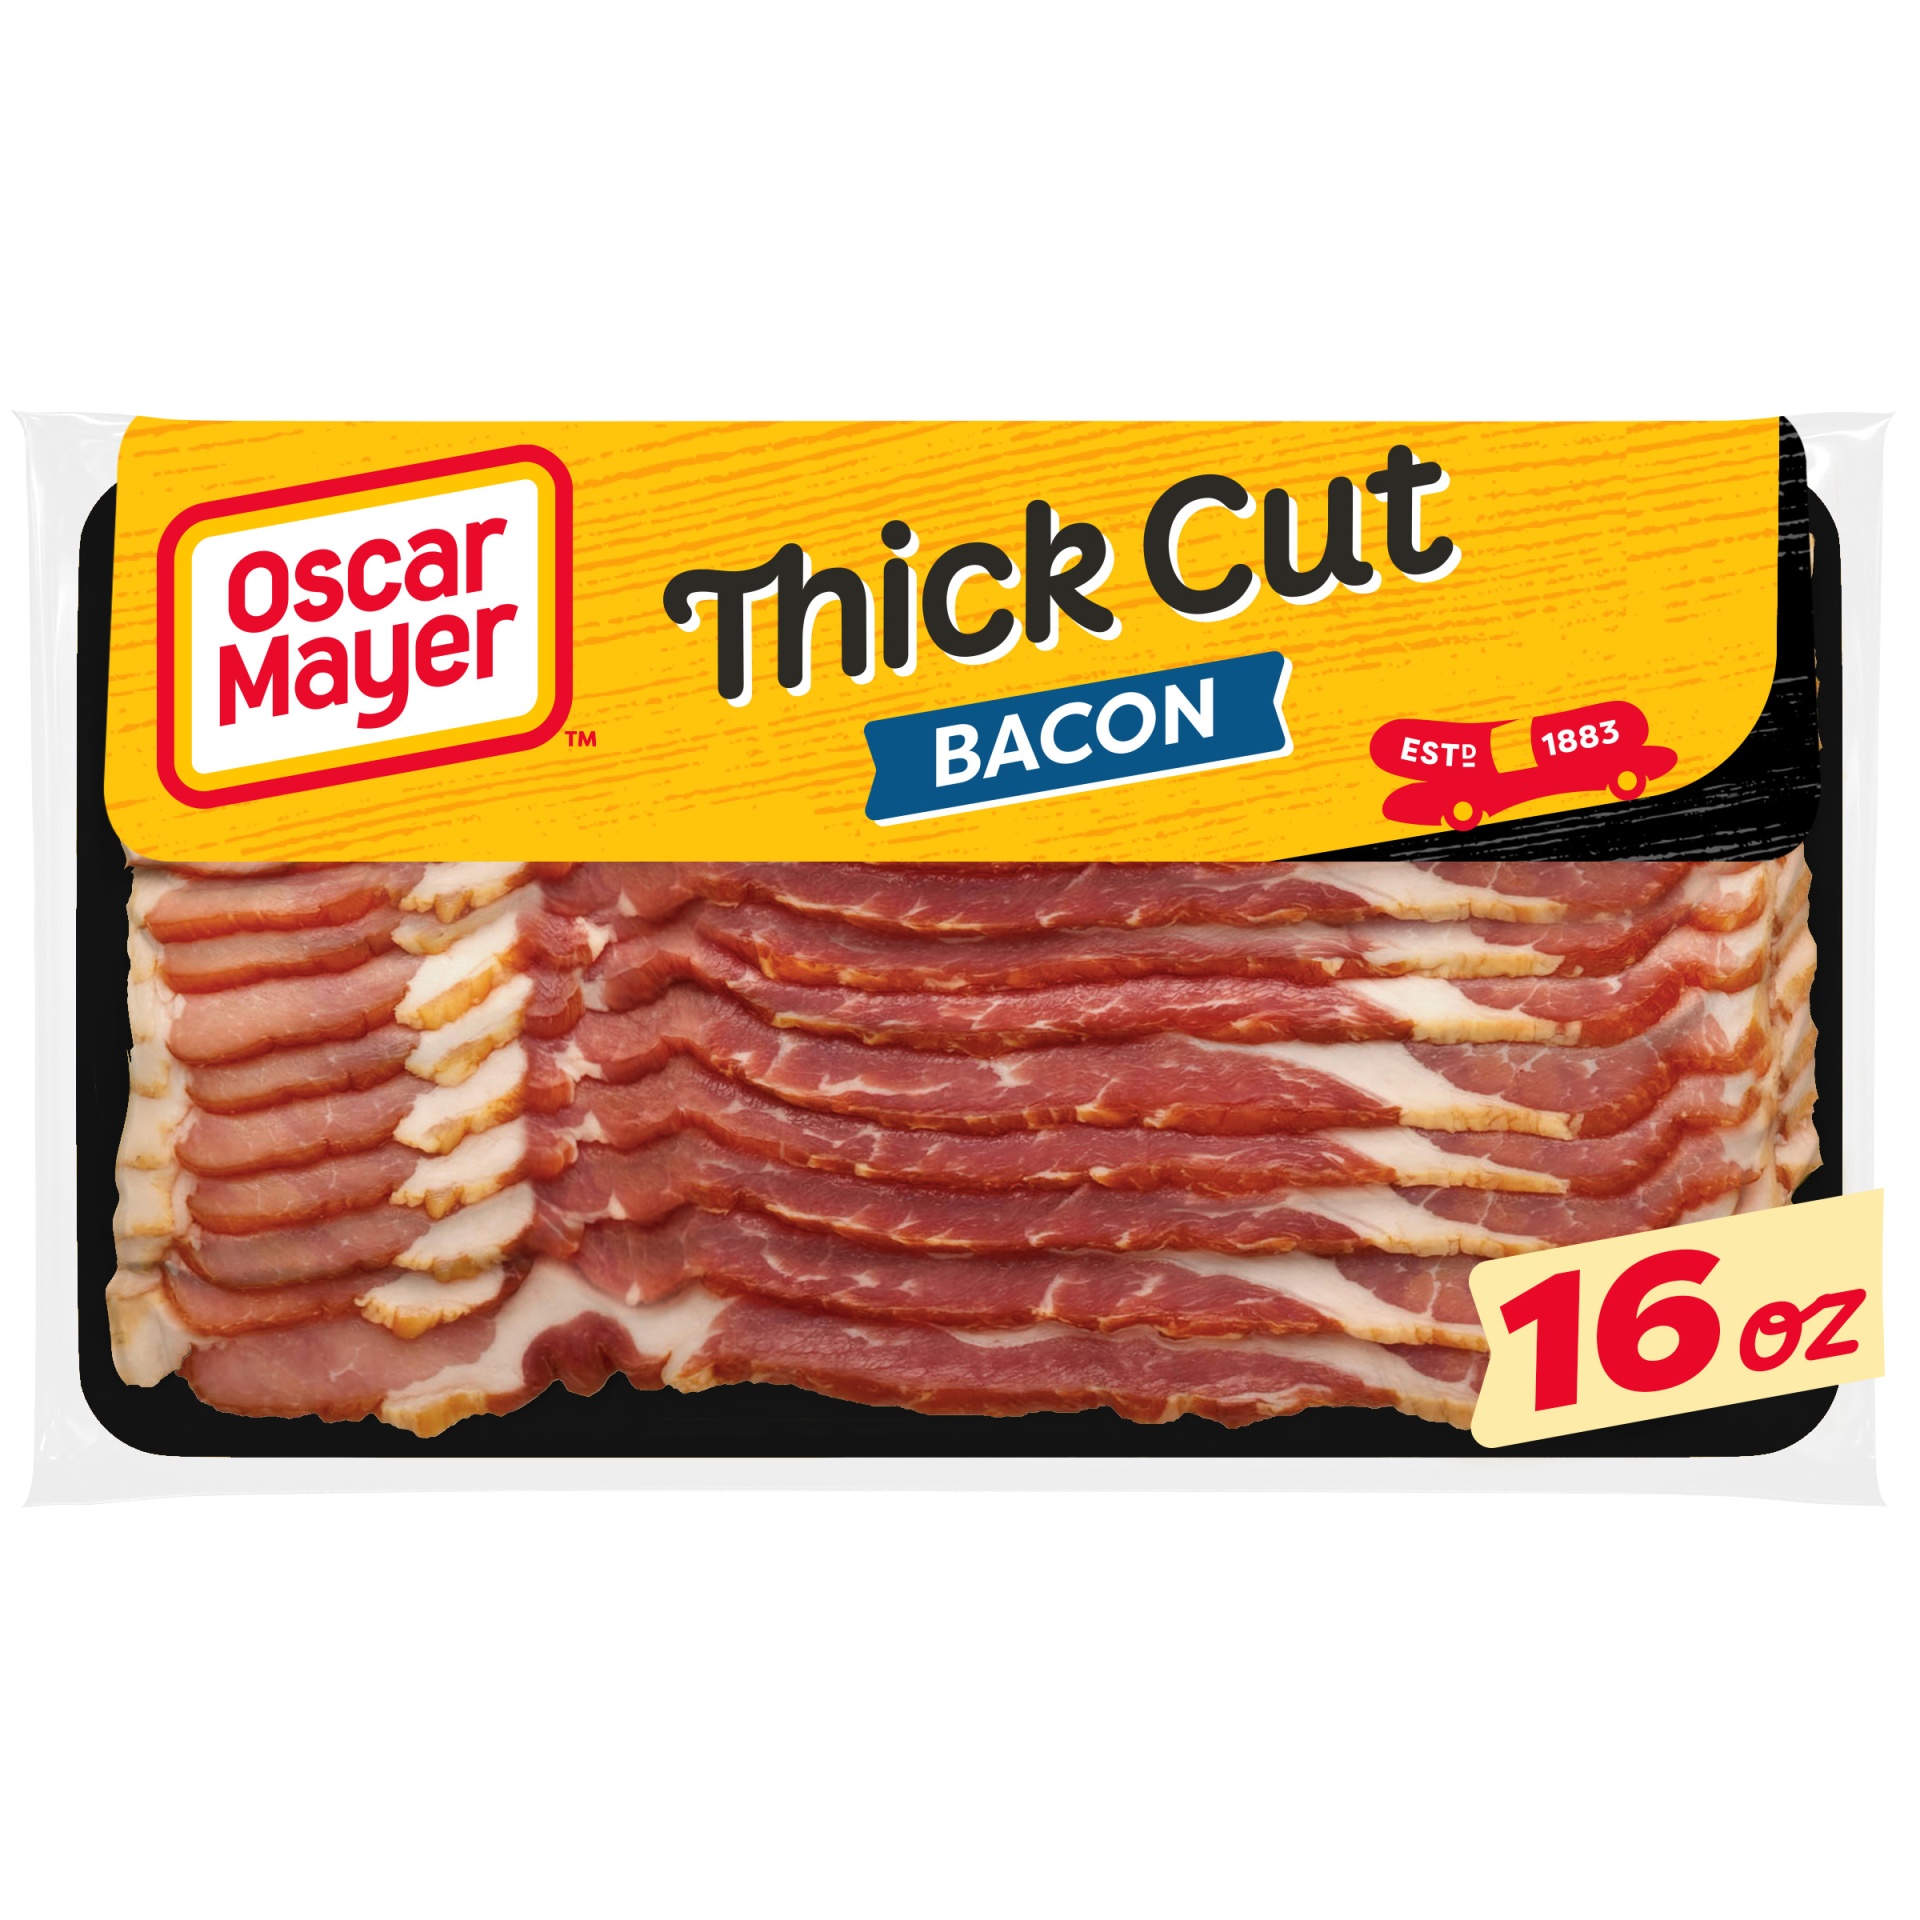 slide 1 of 7, Oscar Mayer Naturally Hardwood Smoked Thick Cut Bacon Pack, 11-13 slices, 16 oz